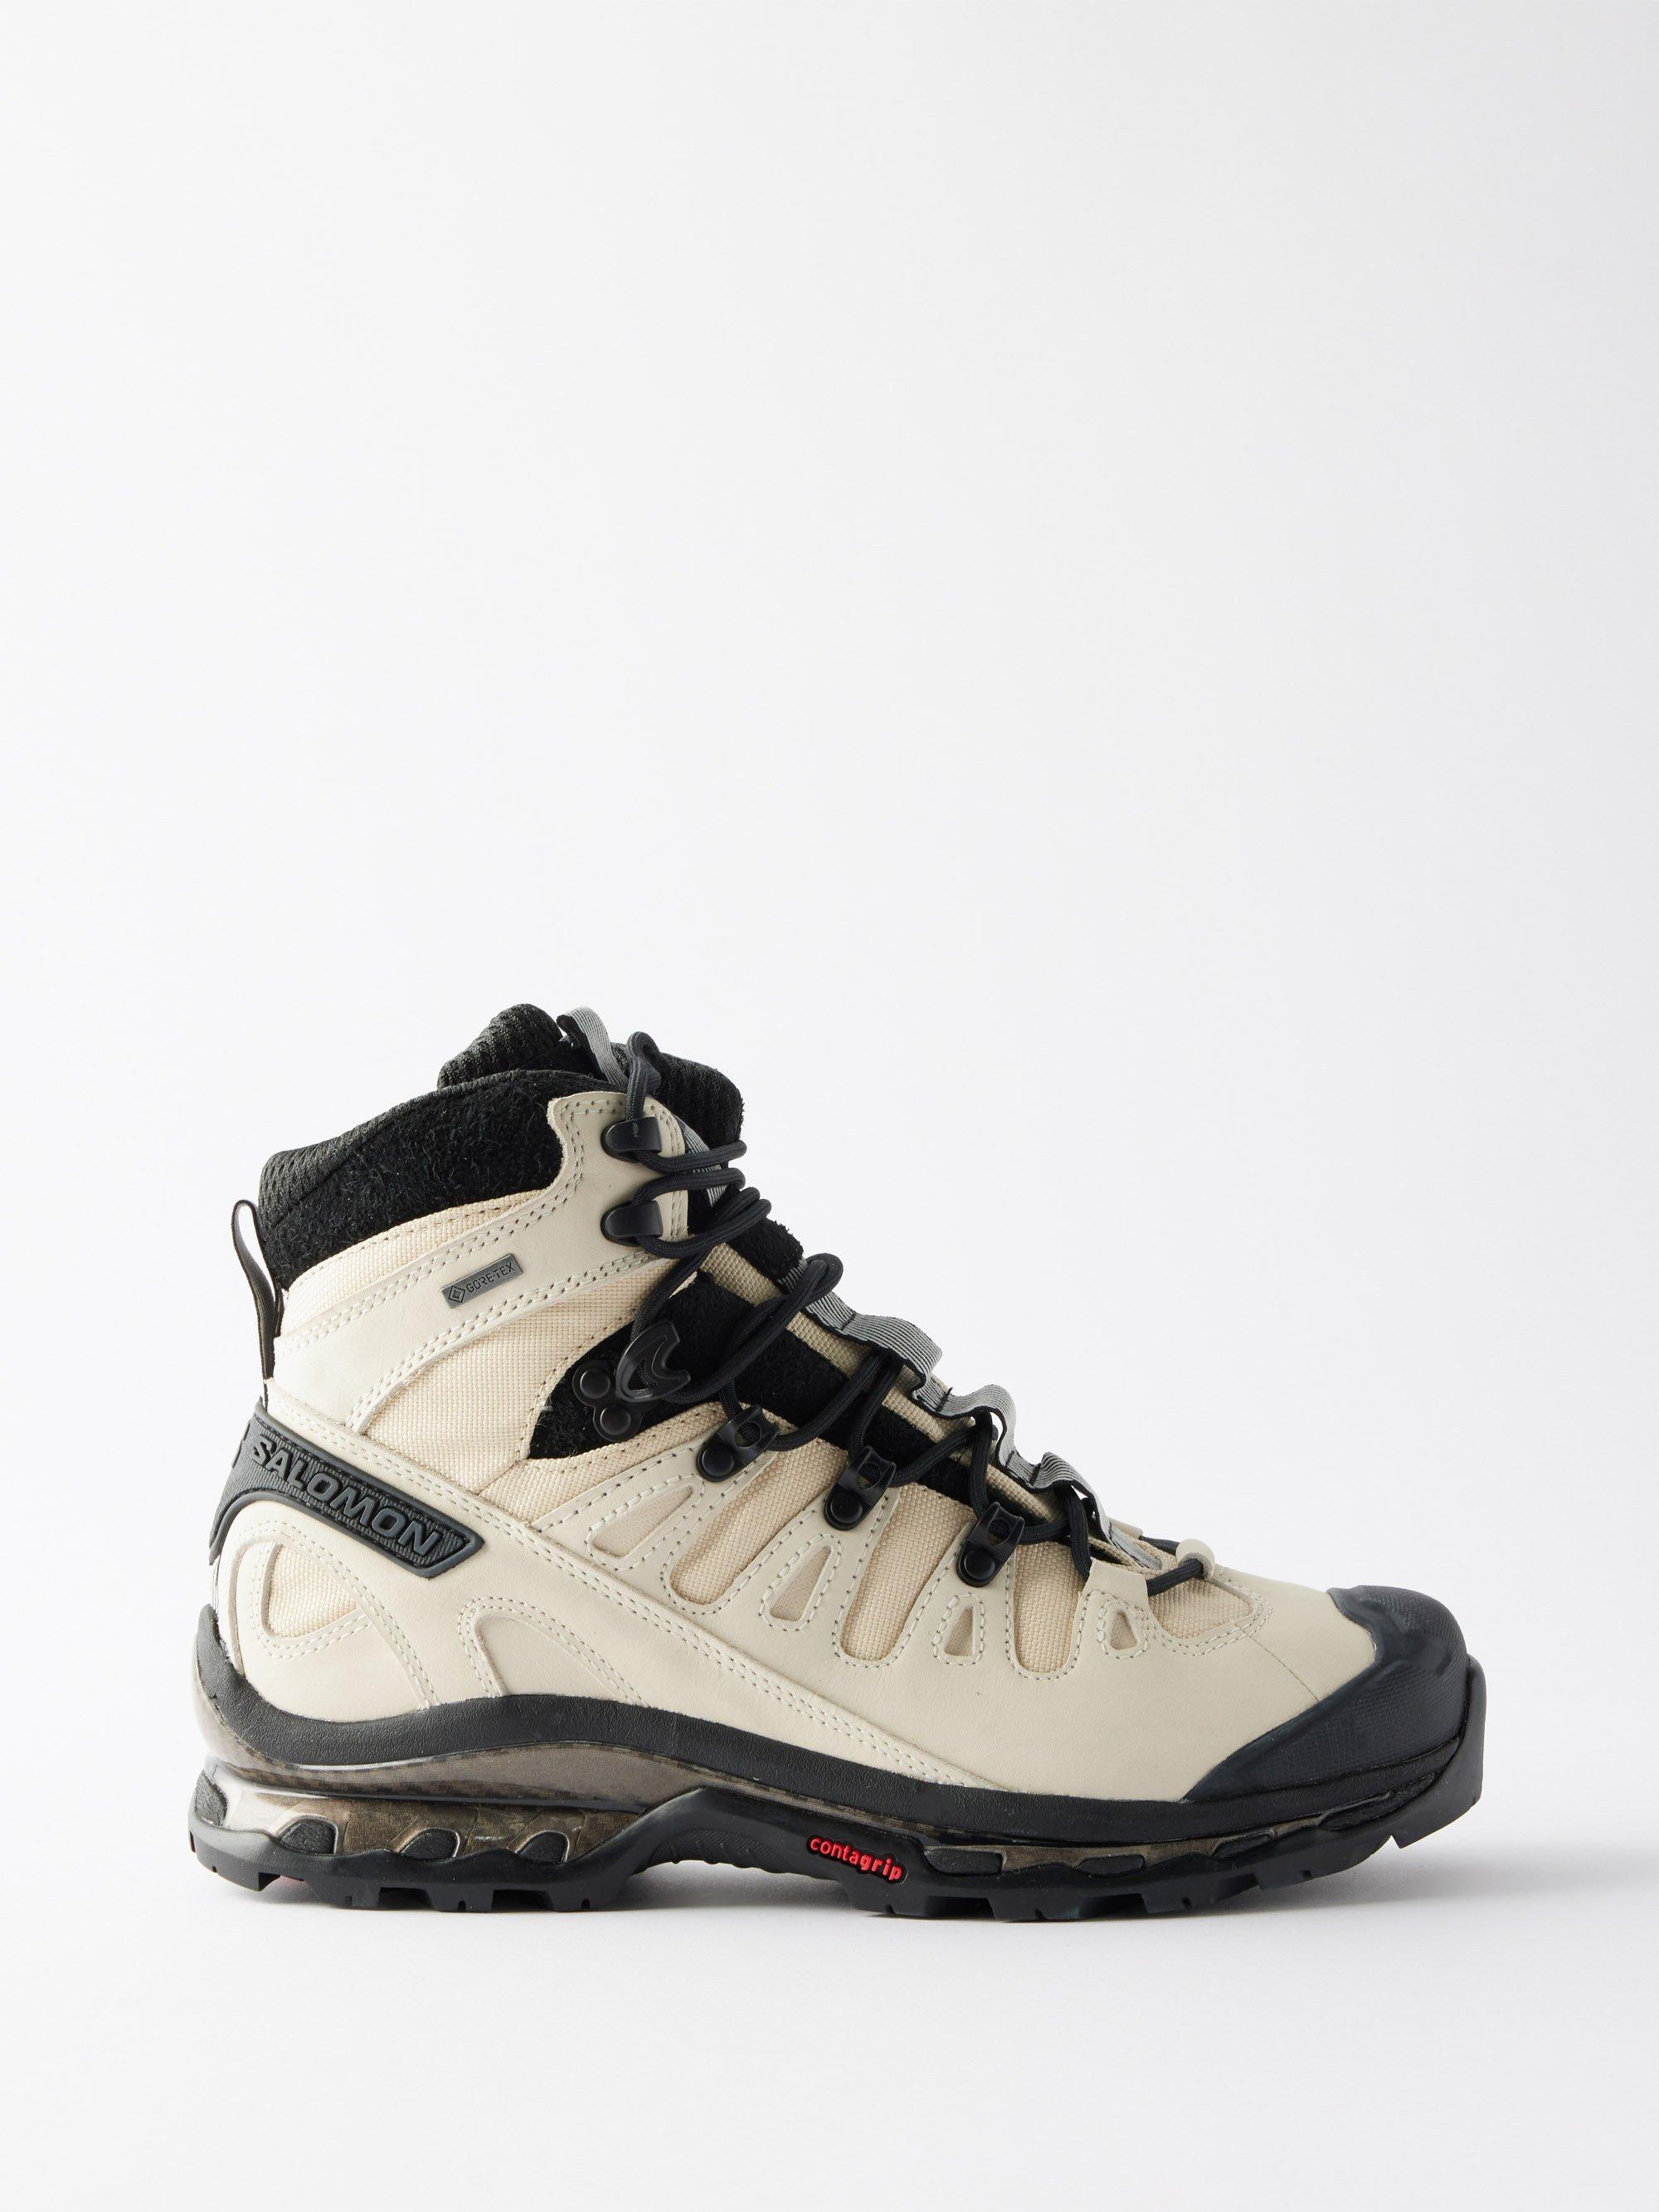 Salomon Quest Gtx Advanced Gore-tex And Leather Boots in White | Lyst